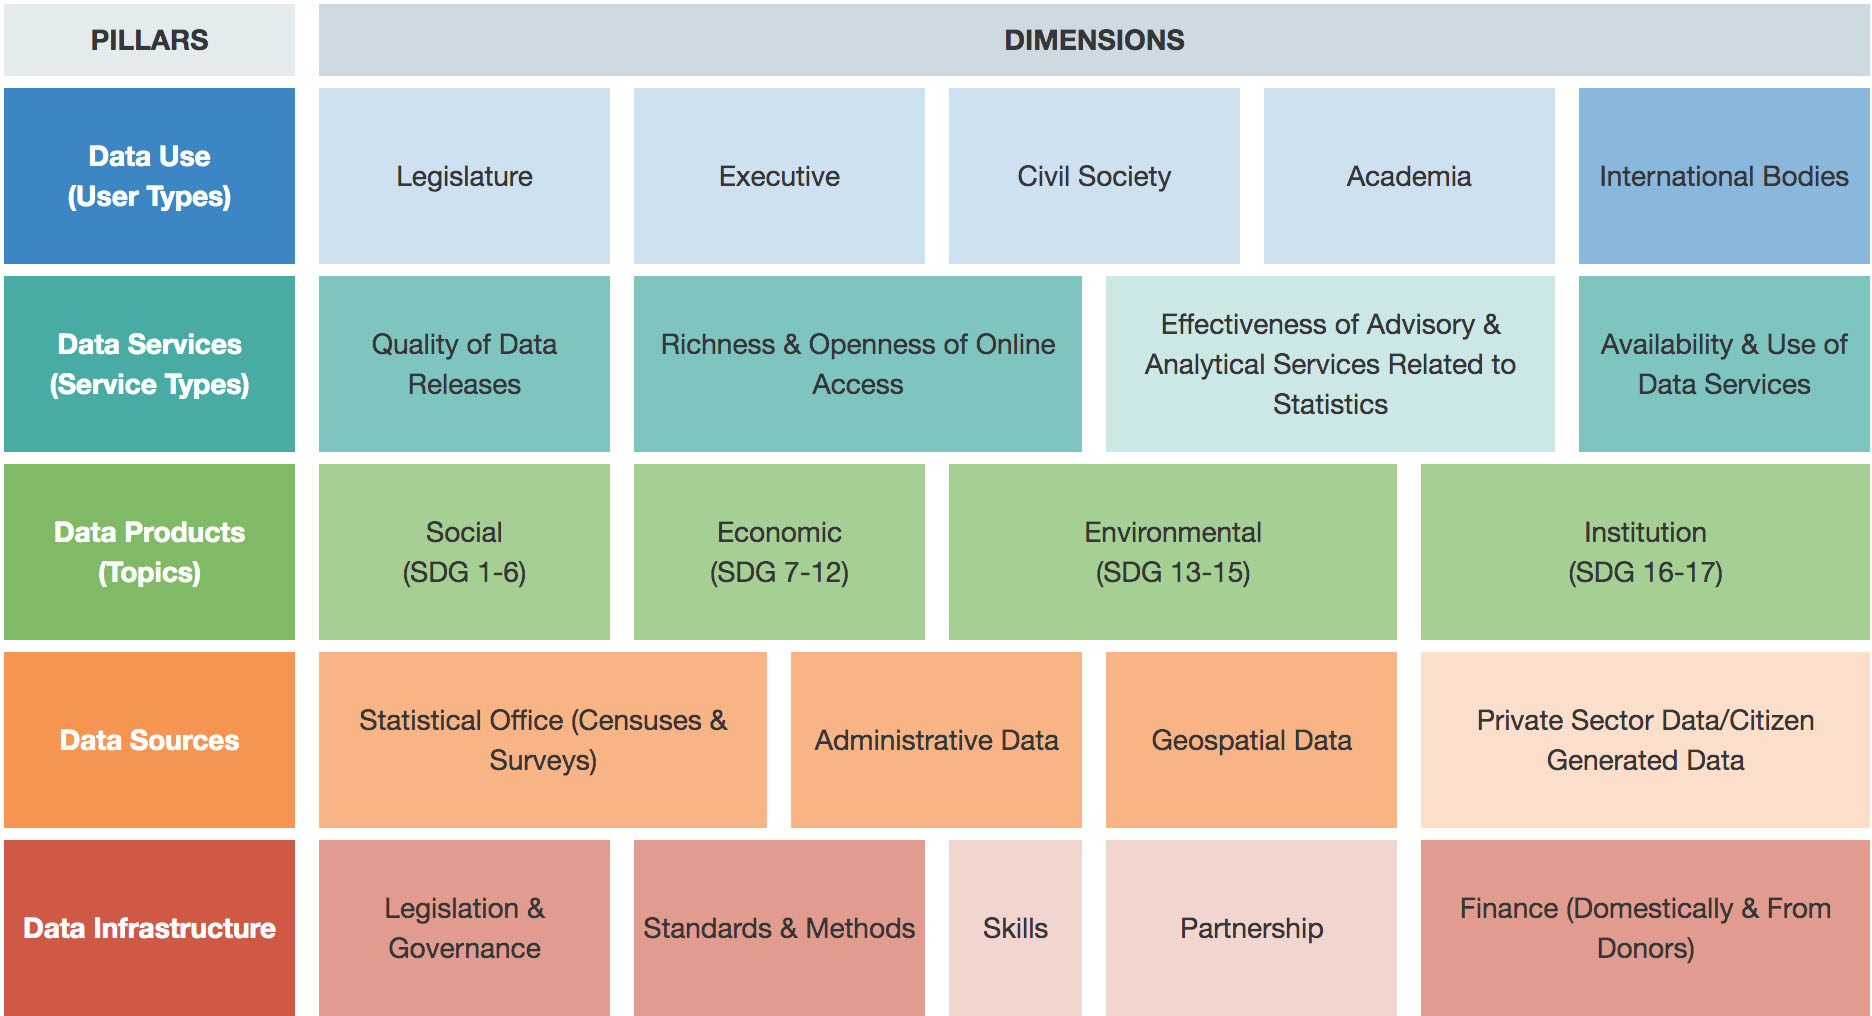 Pillars and dimensions of the statistical performance index. Source: The World Bank Statistical Performance Index Framework.